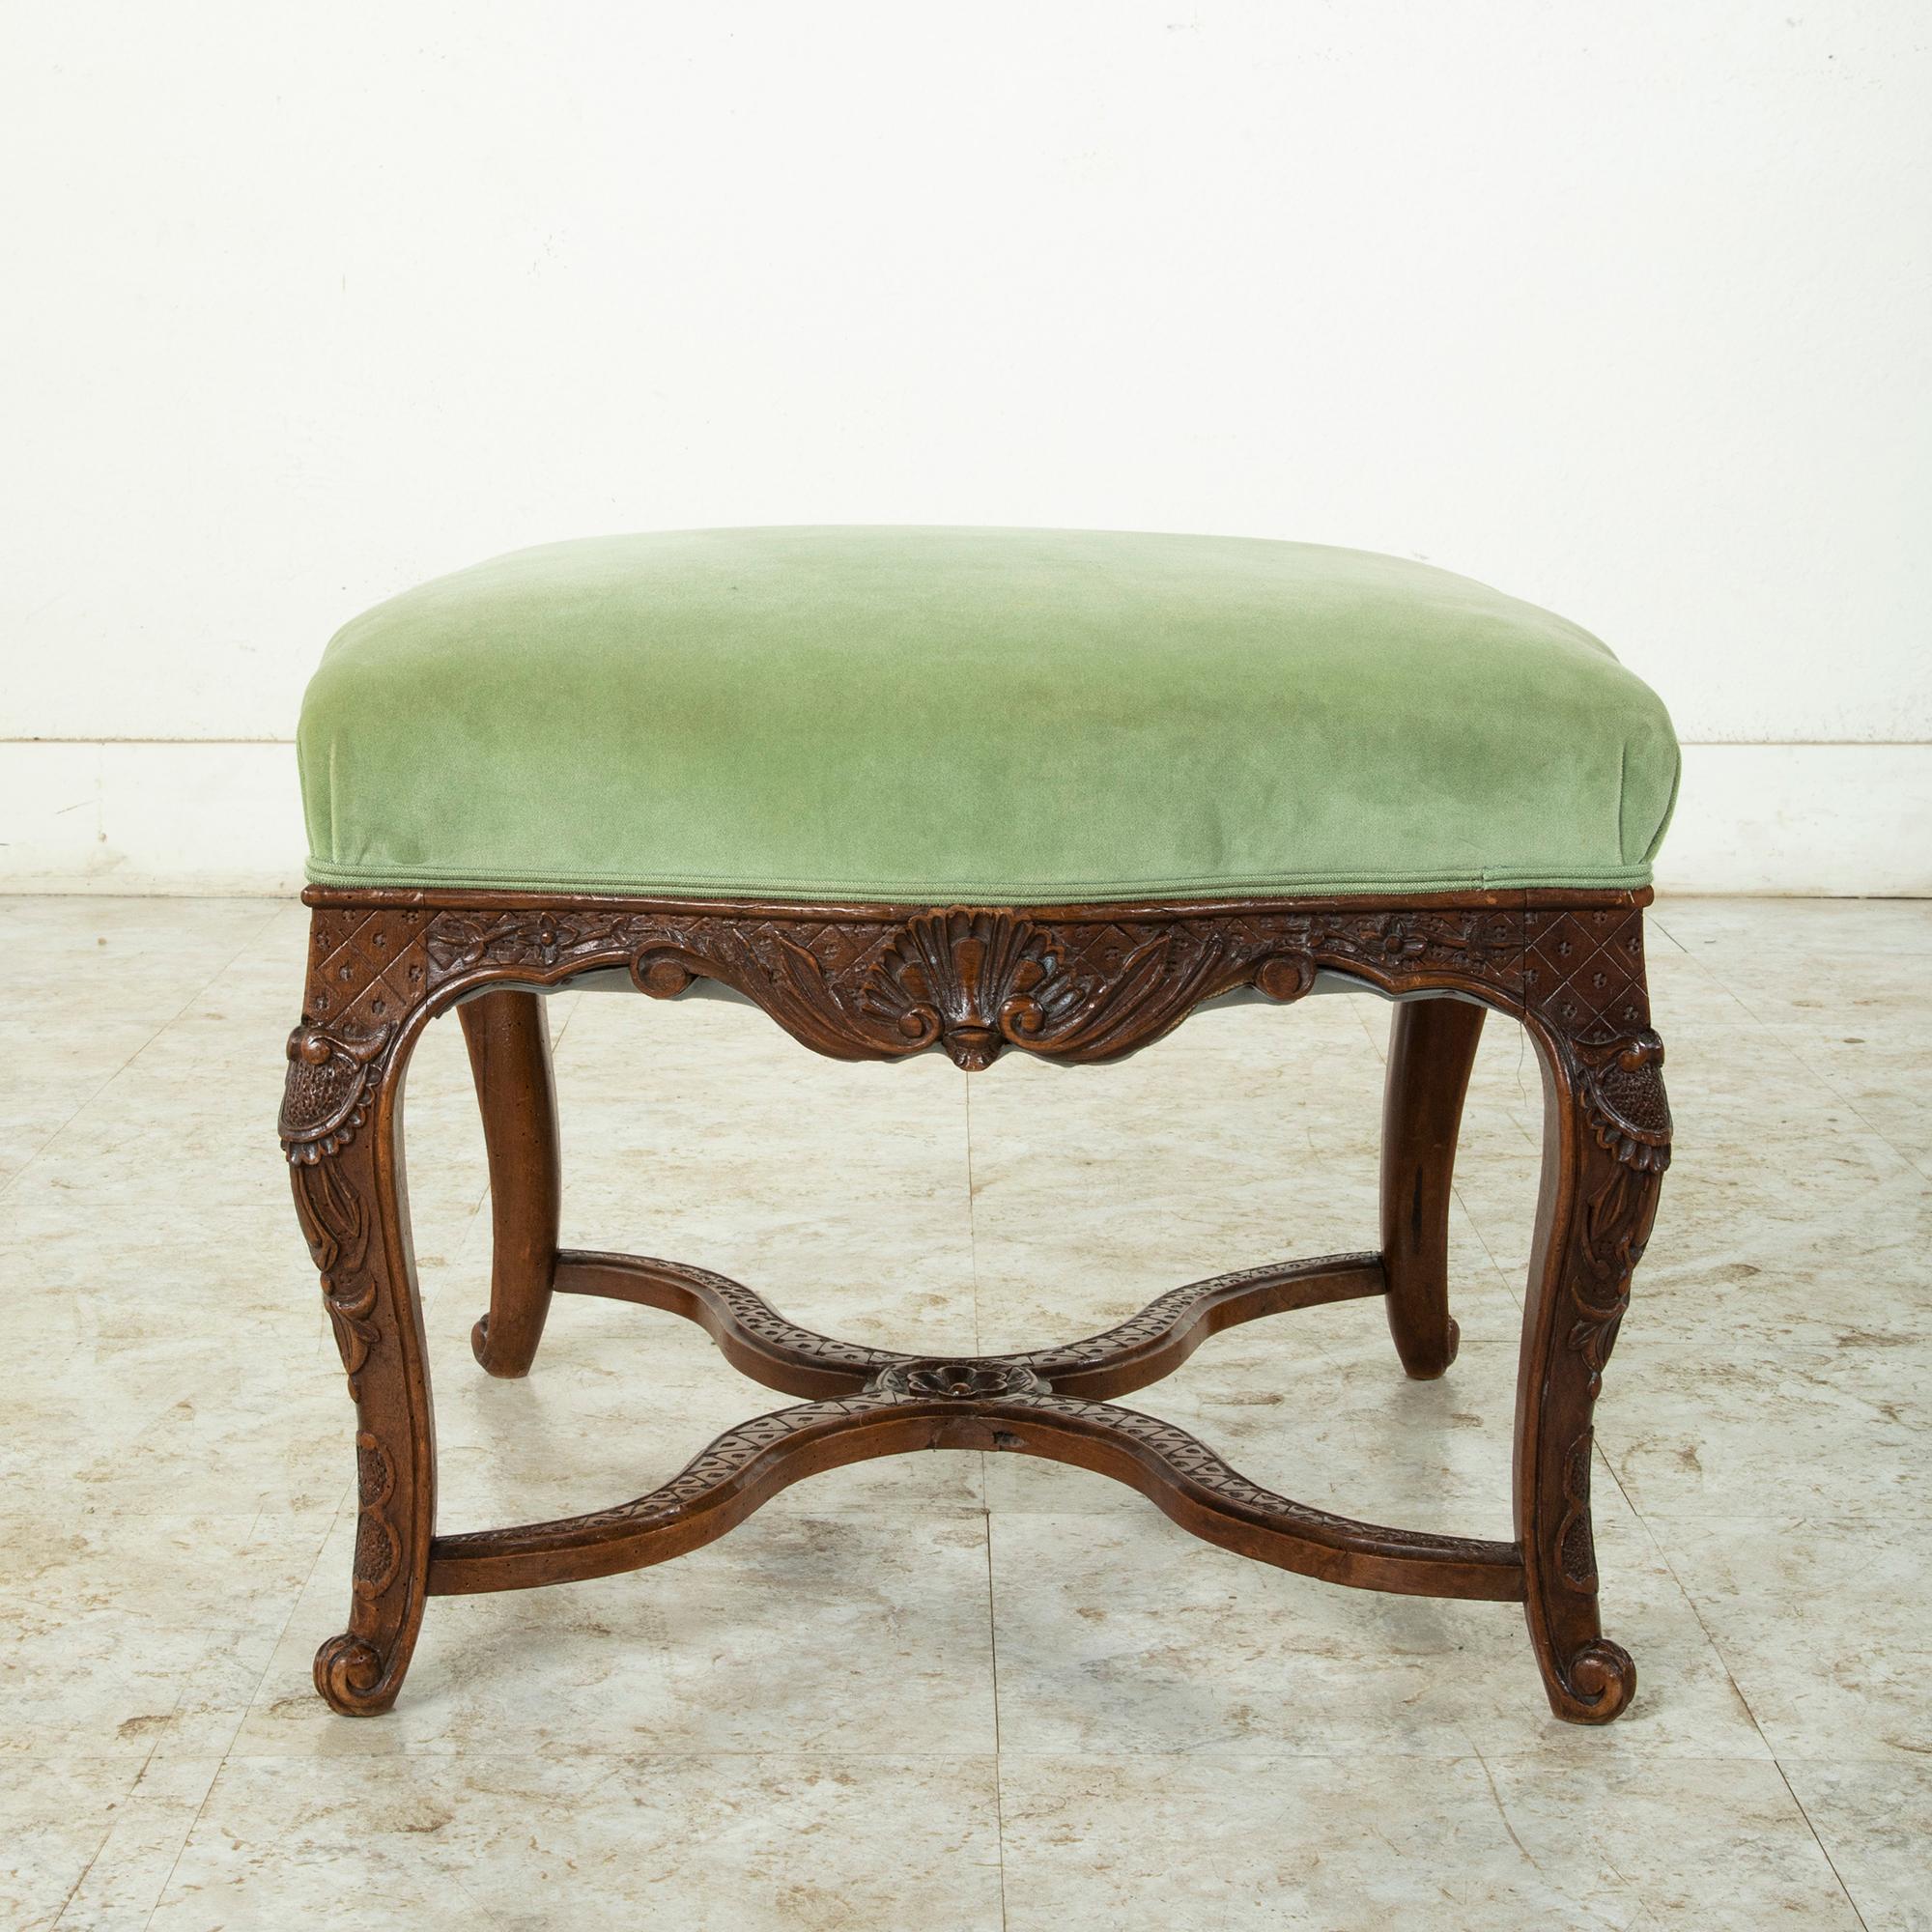 This late 19th century French Regency style oak ottoman or vanity stool features hand carved details of shells, acanthus leaves, and a diamond pattern. The seat rests on cabriolet legs joined by an X stretcher that provides additional stability. The